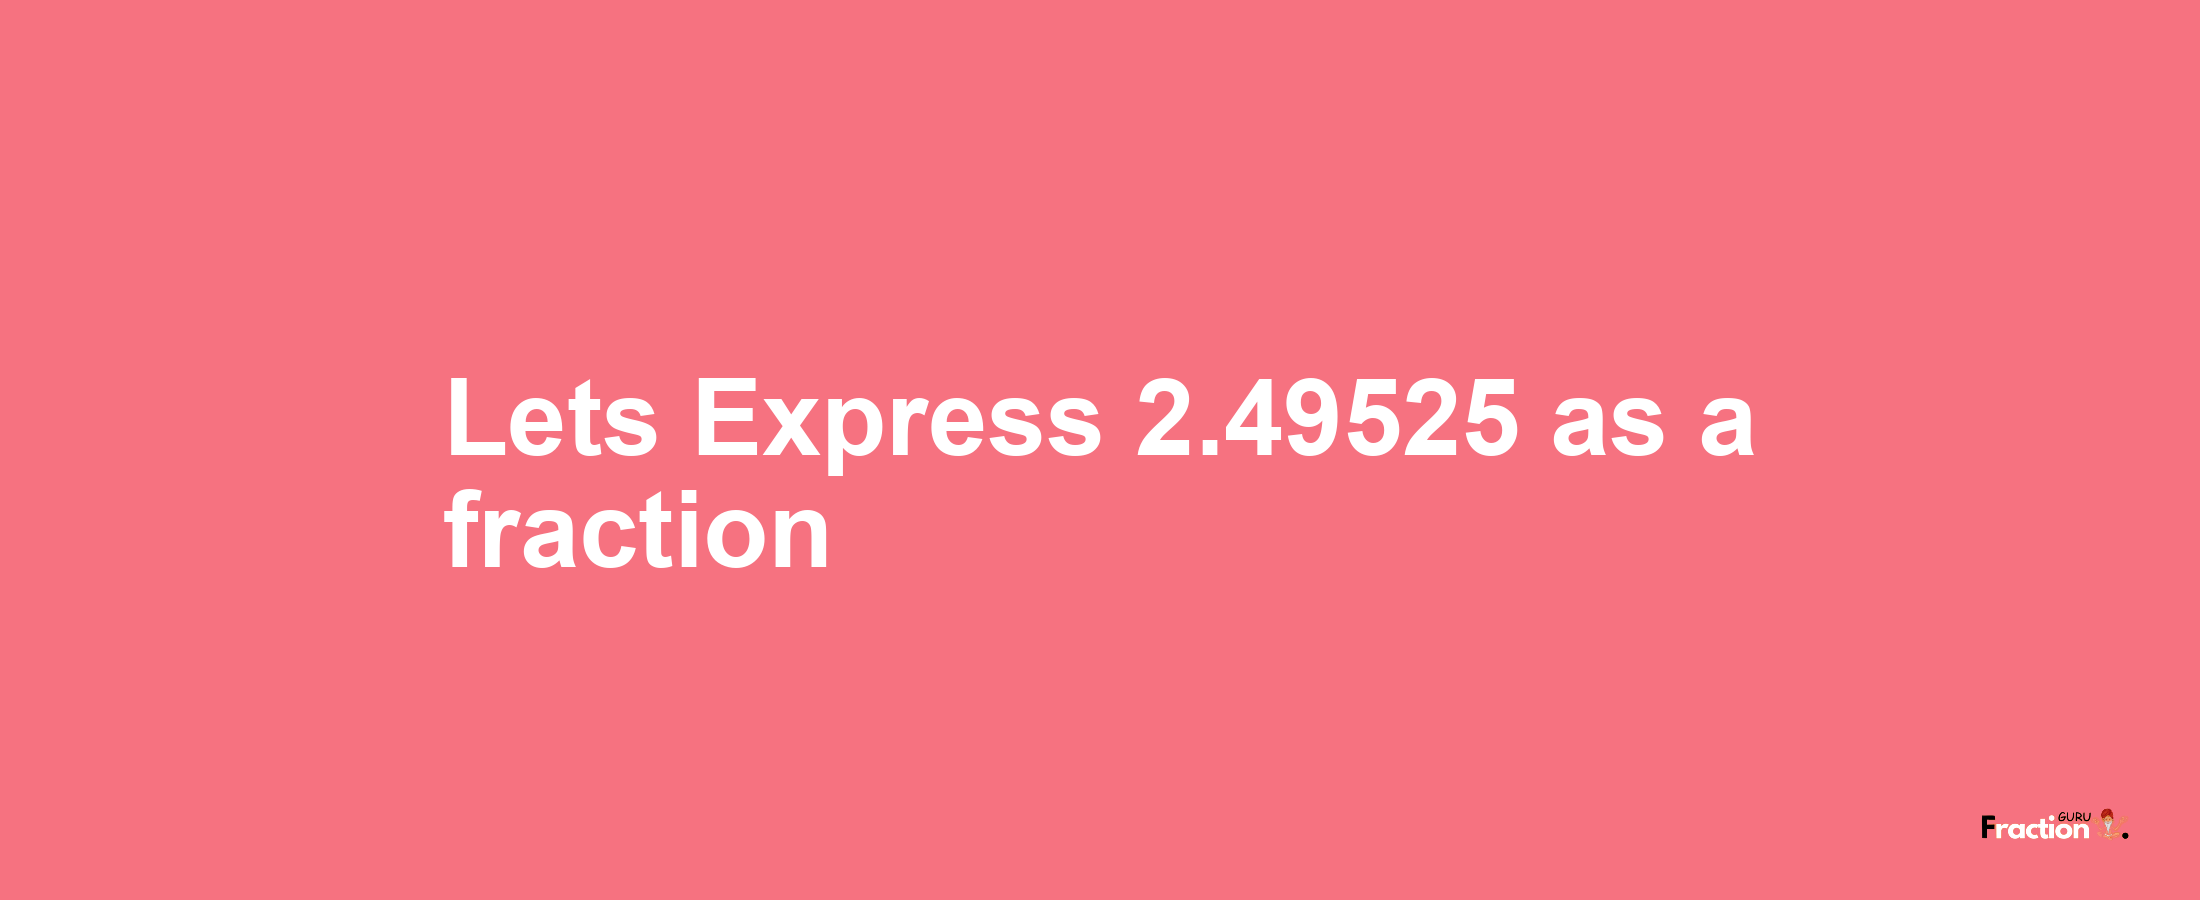 Lets Express 2.49525 as afraction